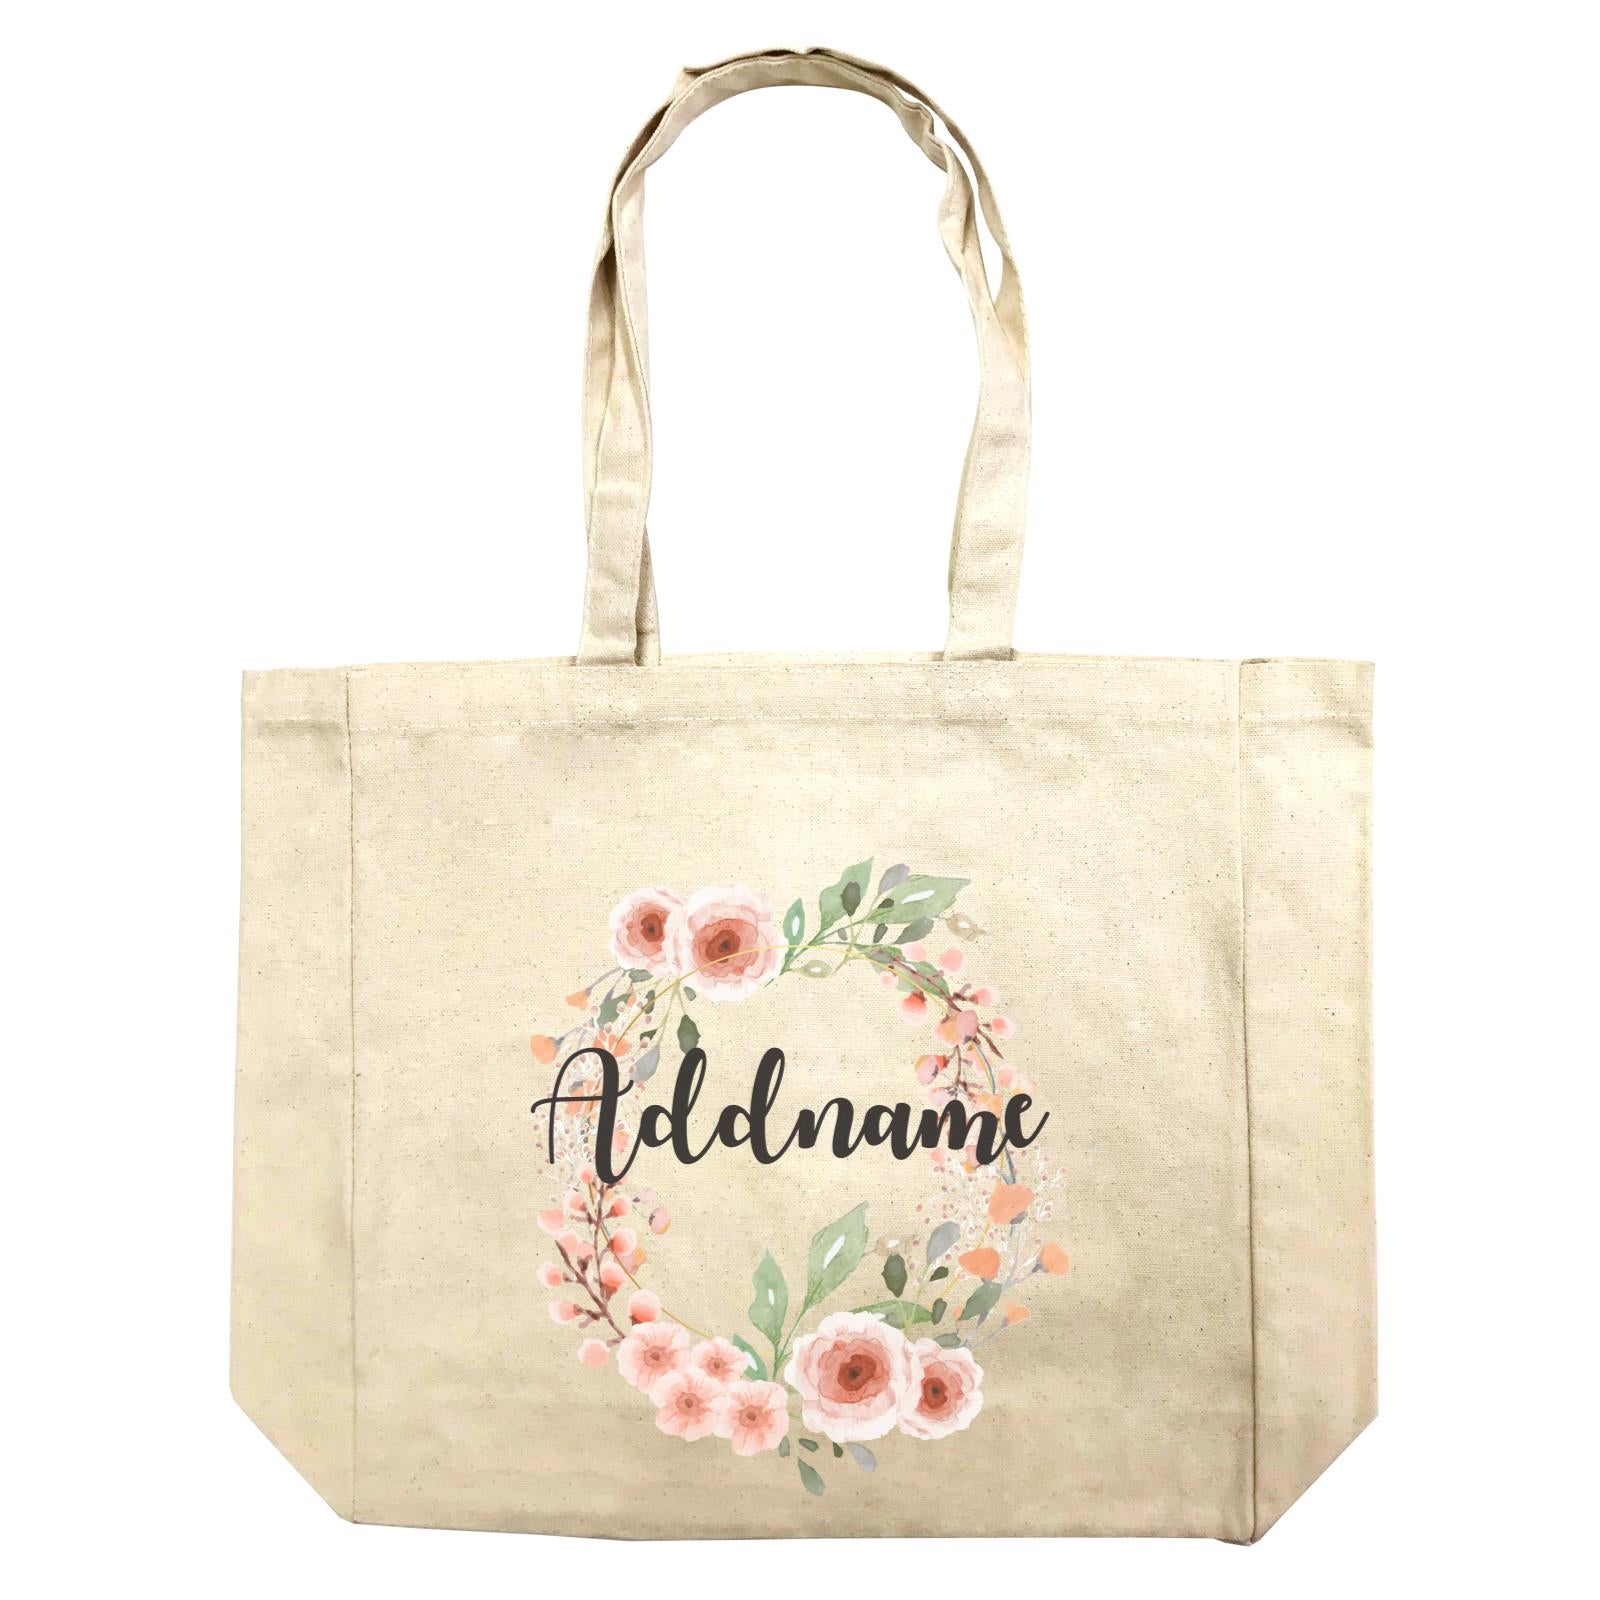 Floral Sweet 2 Watercolour Flower Wreath Addname Shopping Bag